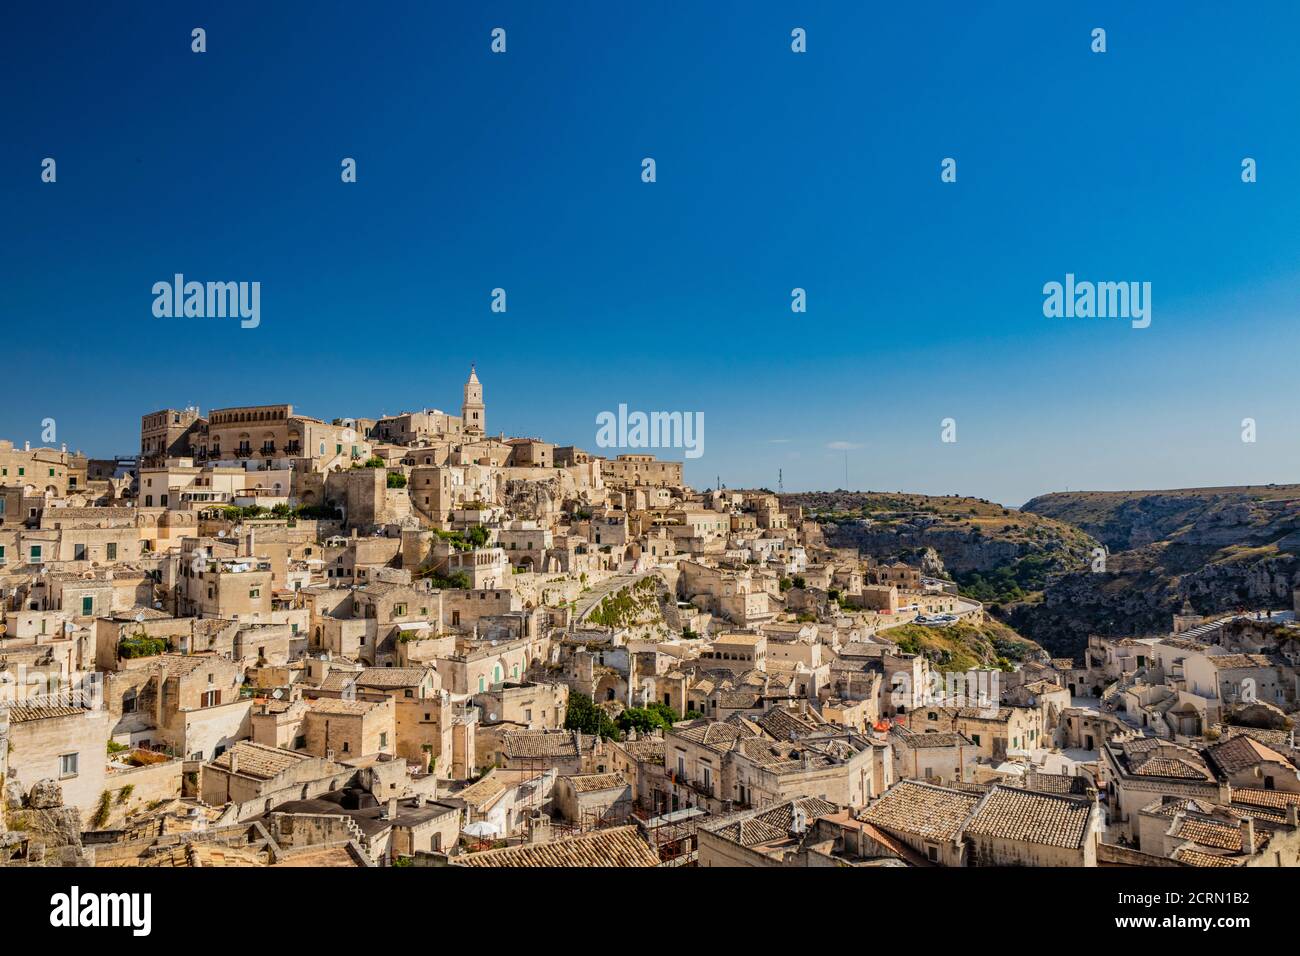 Matera, Basilicata, Italy - Panoramic view from the top of the Sassi of Matera, Barisano and Caveoso. The ancient houses of stone and brick, carved in Stock Photo